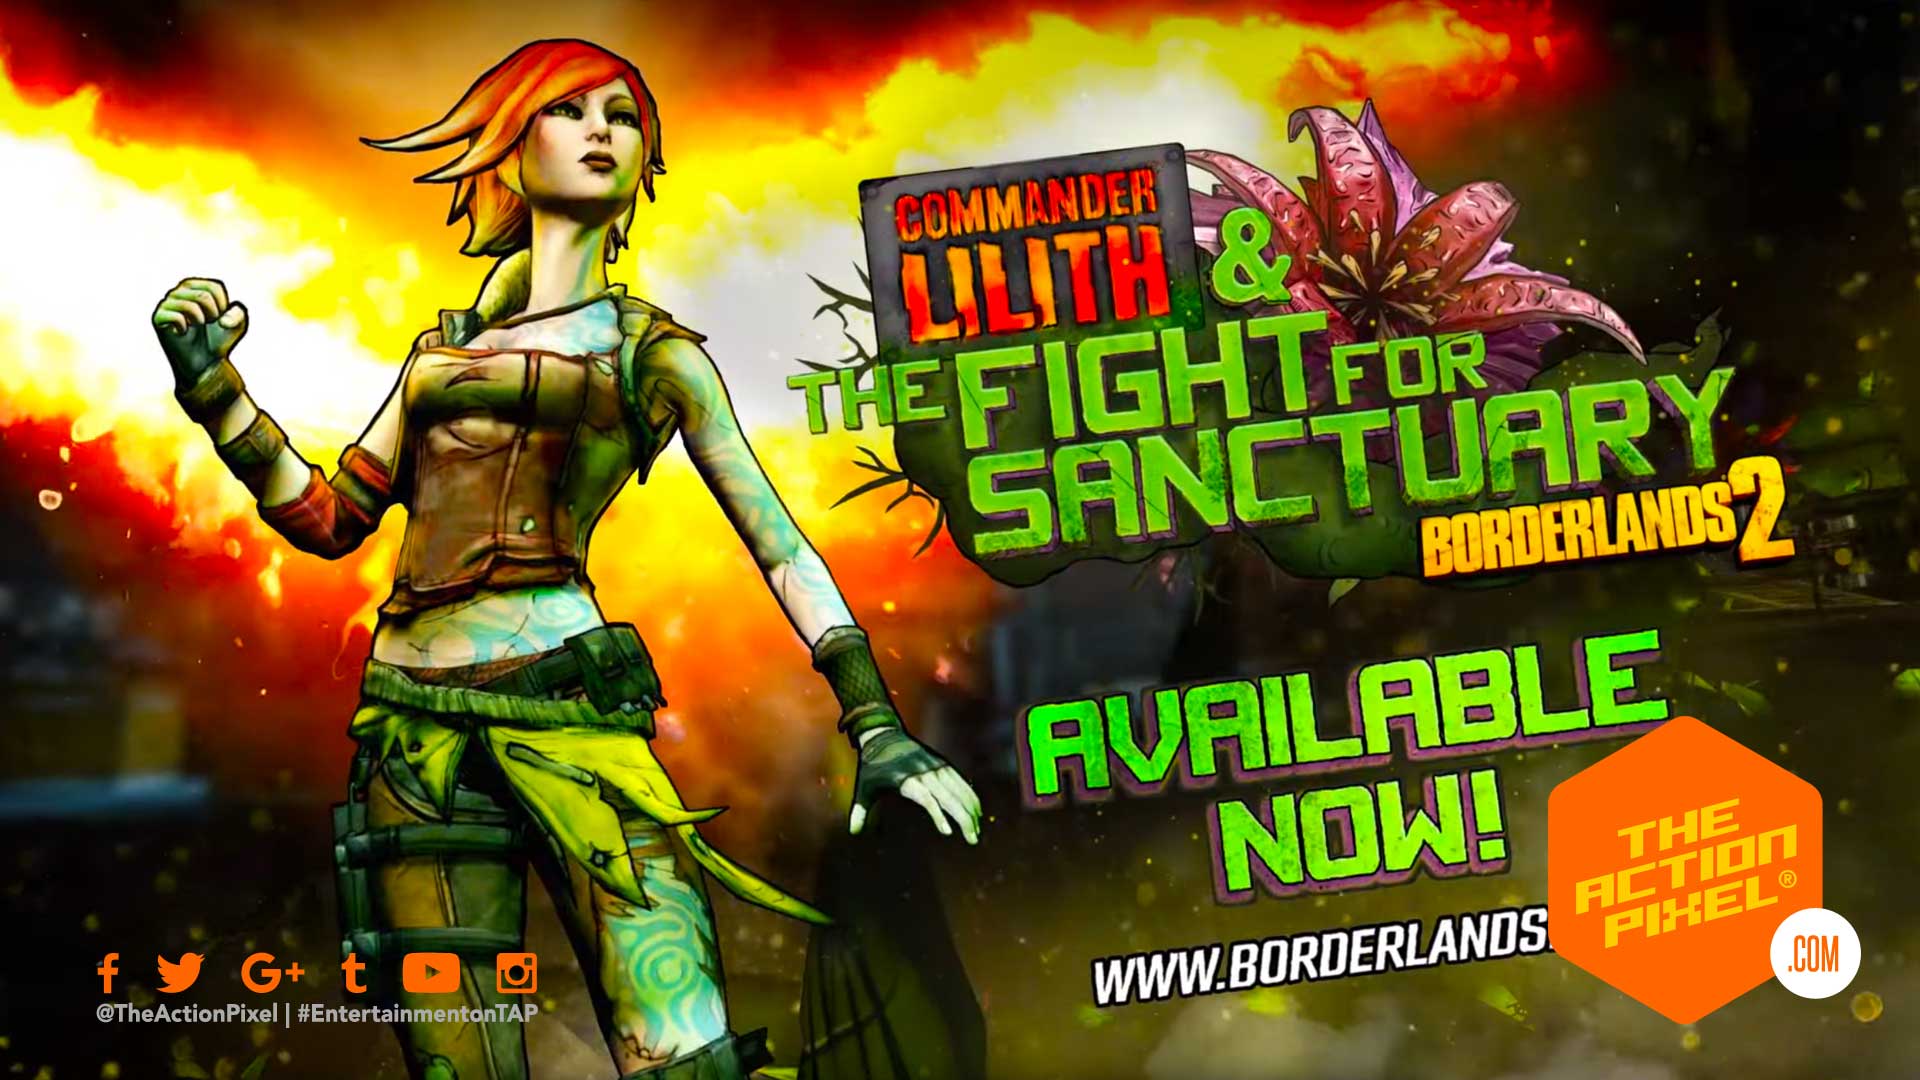 borderlands 2, borderlands 2: commander lilith and the fight for sanctuary, borderlands 3, entertainment on tap, the action pixel